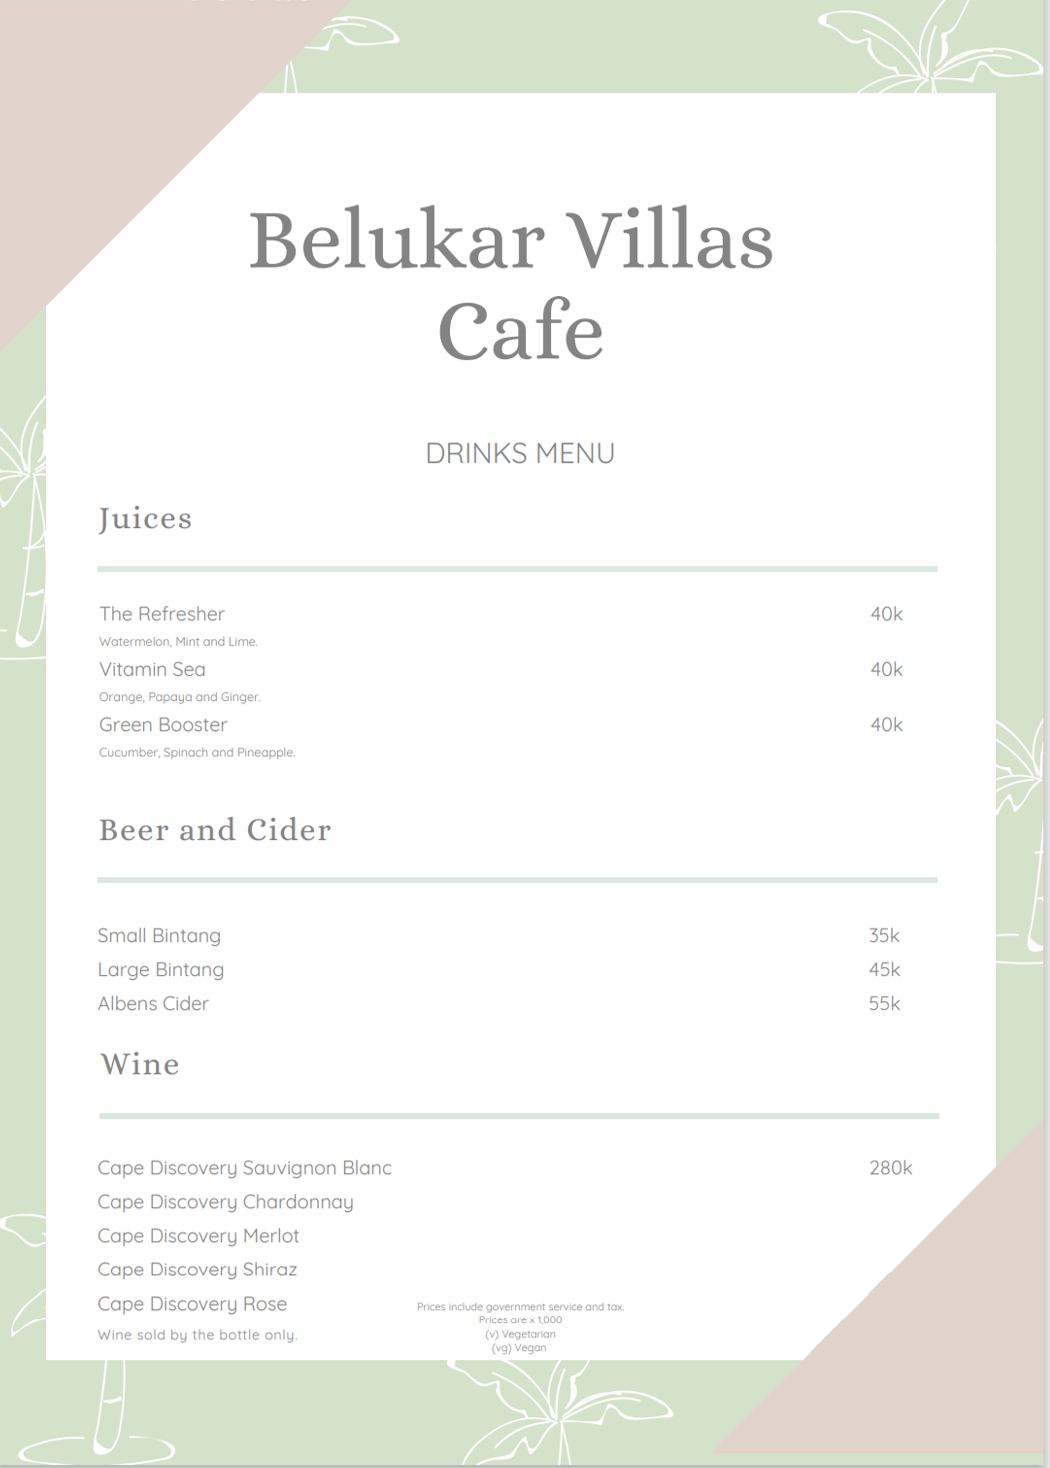 https://cloudmixer.gracepl.us/sites/belukarvillas.com/files/pictures/Cafe%20and%20menu/Cage%20page%204.png